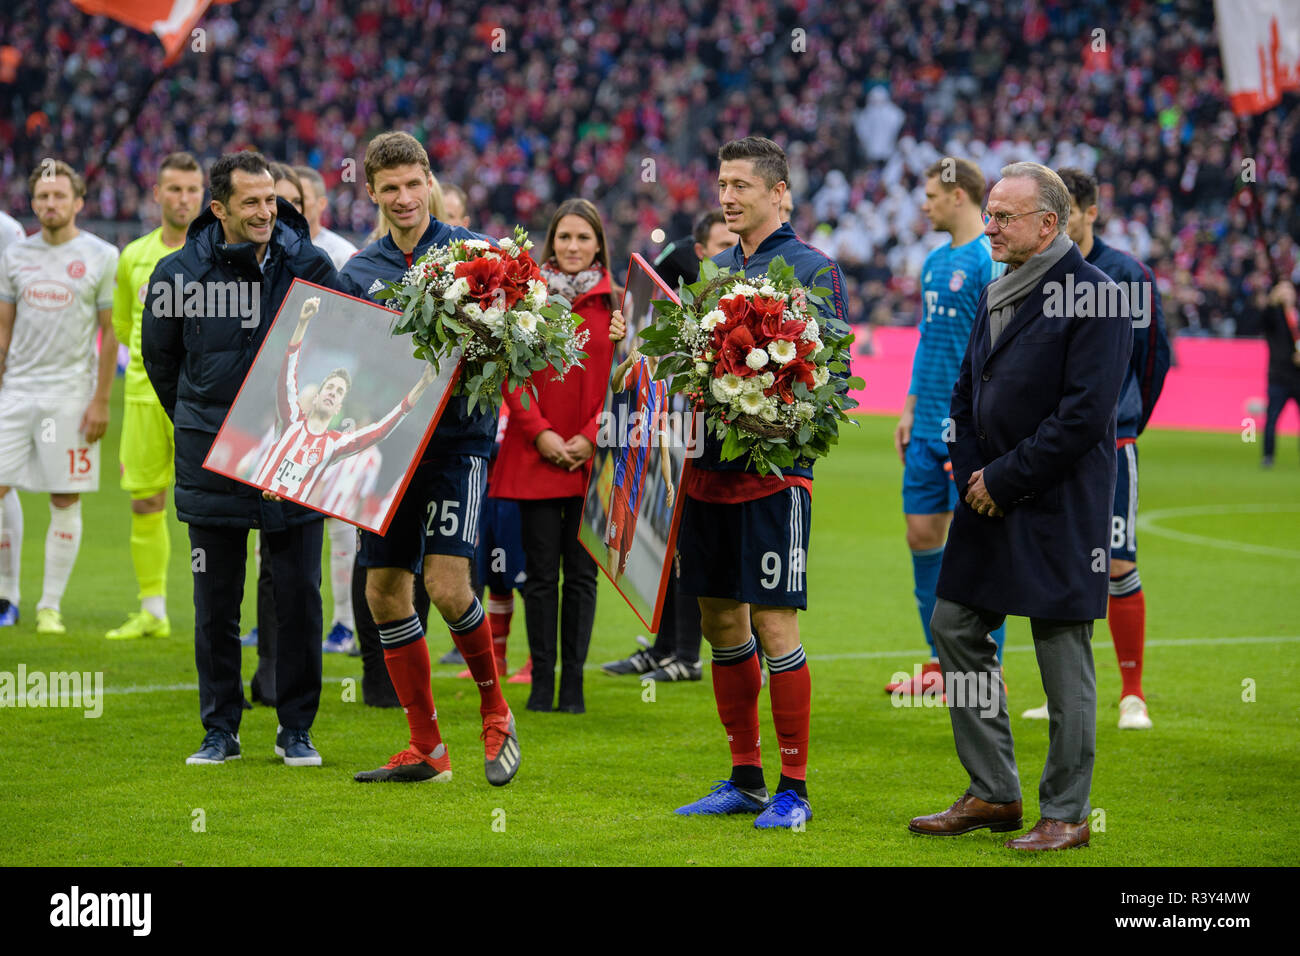 24 November 2018, Bavaria, München: Soccer: Bundesliga, Bayern Munich - Fortuna Düsseldorf, 12th matchday in the Allianz Arena. Thomas Müller from FC Bayern Munich (2nd from left) and Robert Lewandowski from FC Bayern Munich (2nd from right) are honoured for their admission to the 100 Club. On the left is Hasan Salihamidzic, sports director of FC Bayern, and on the right Karl-Heinz Rummenigge, CEO of FC Bayern. Photo: Matthias Balk/dpa - IMPORTANT NOTE: In accordance with the requirements of the DFL Deutsche Fußball Liga or the DFB Deutscher Fußball-Bund, it is prohibited to use or have used p Stock Photo